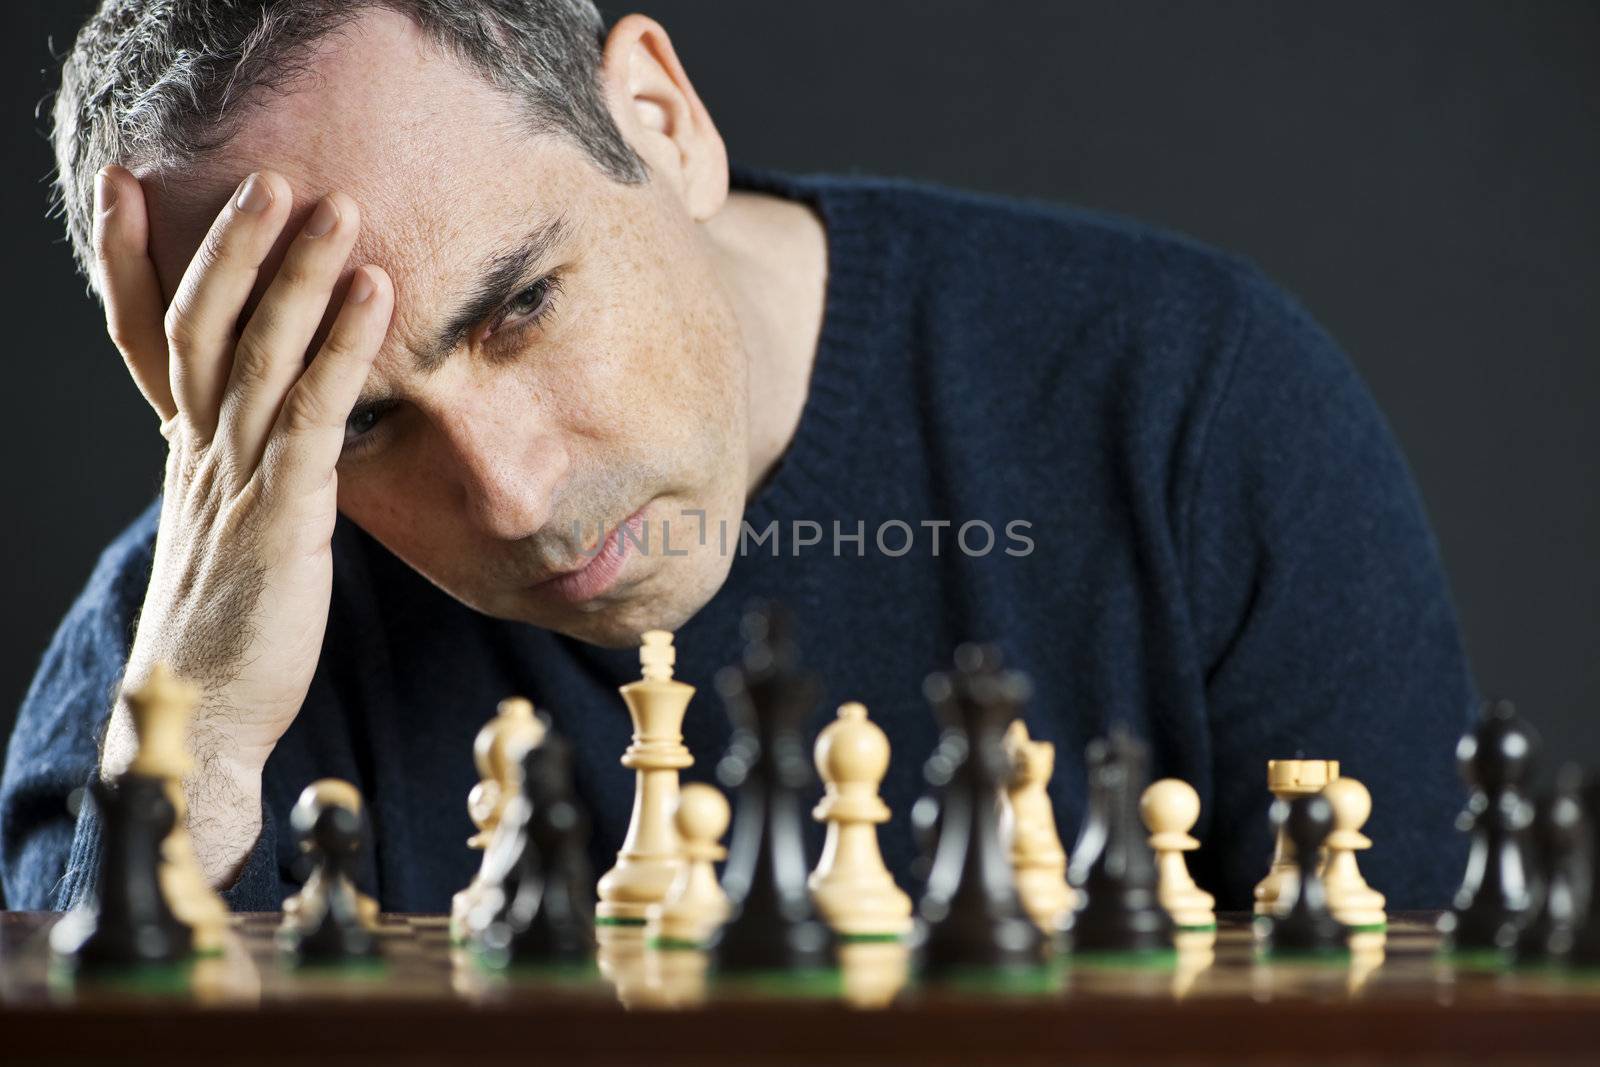 Man at chess board by elenathewise